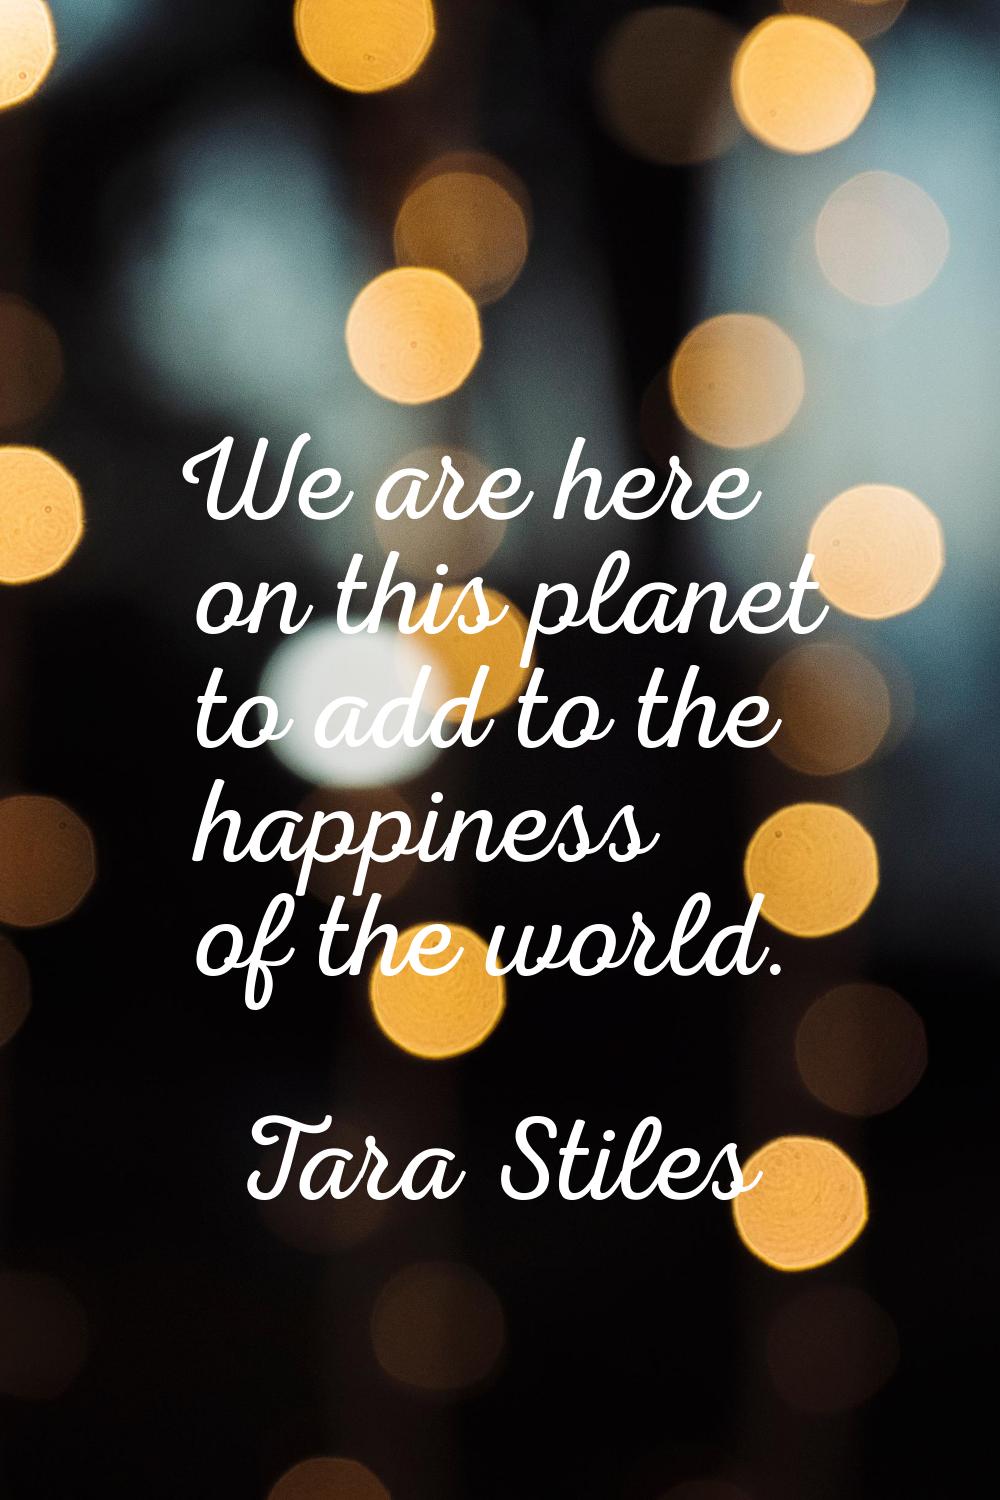 We are here on this planet to add to the happiness of the world.